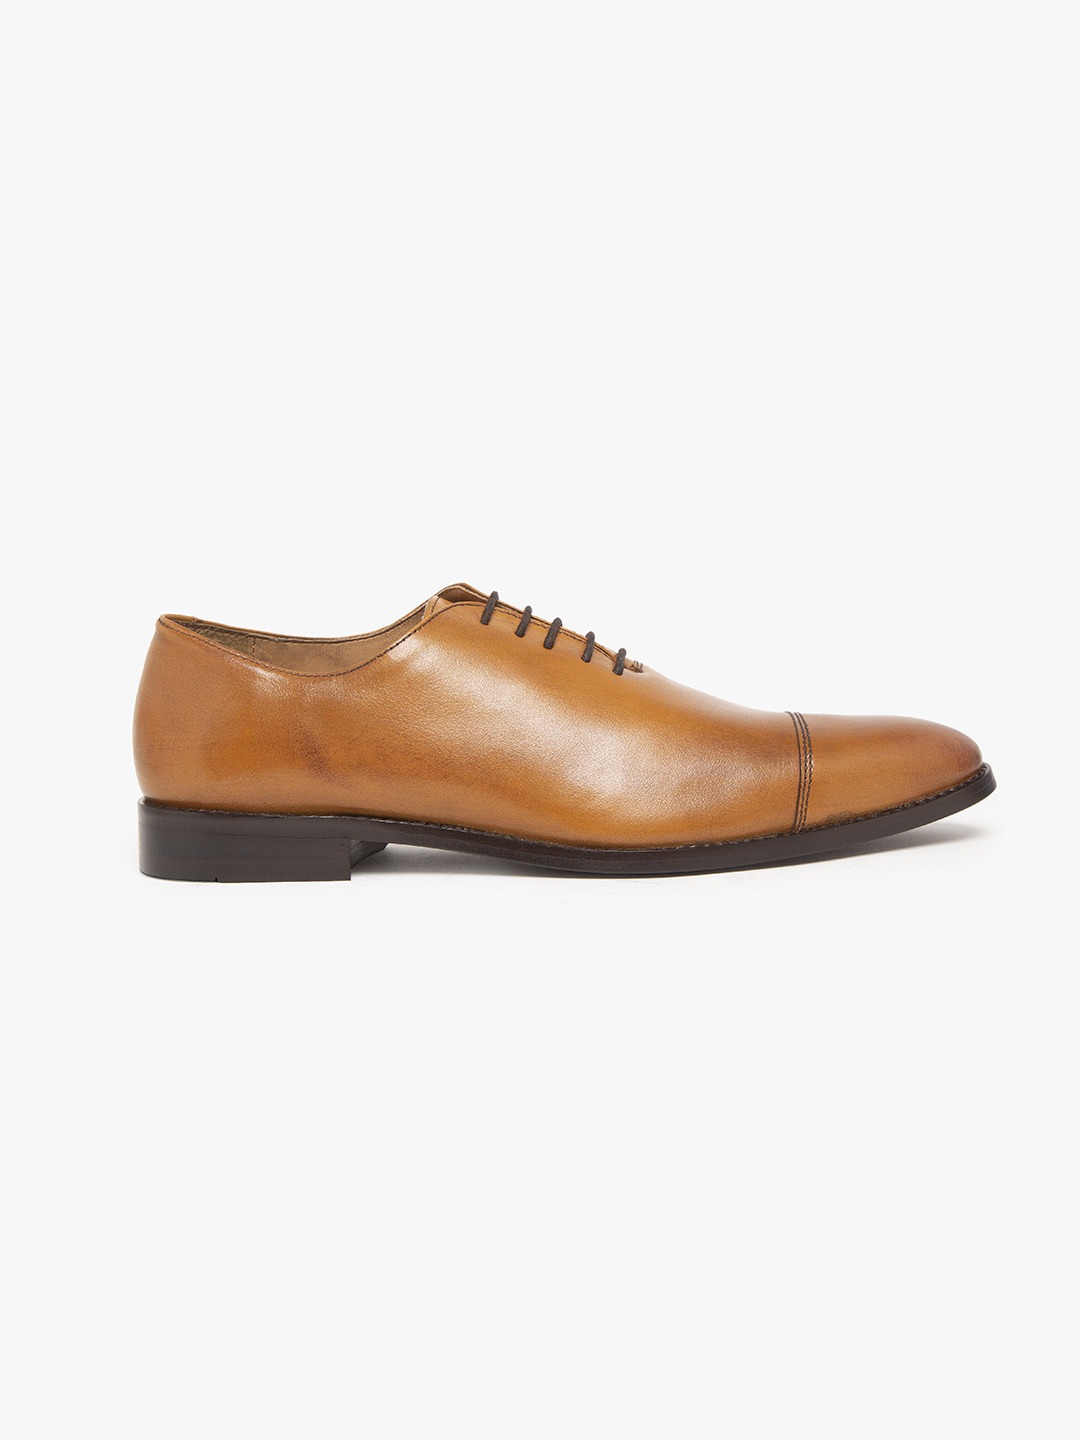 Buy Online Genuine Leather Tan Oxford Shoes online